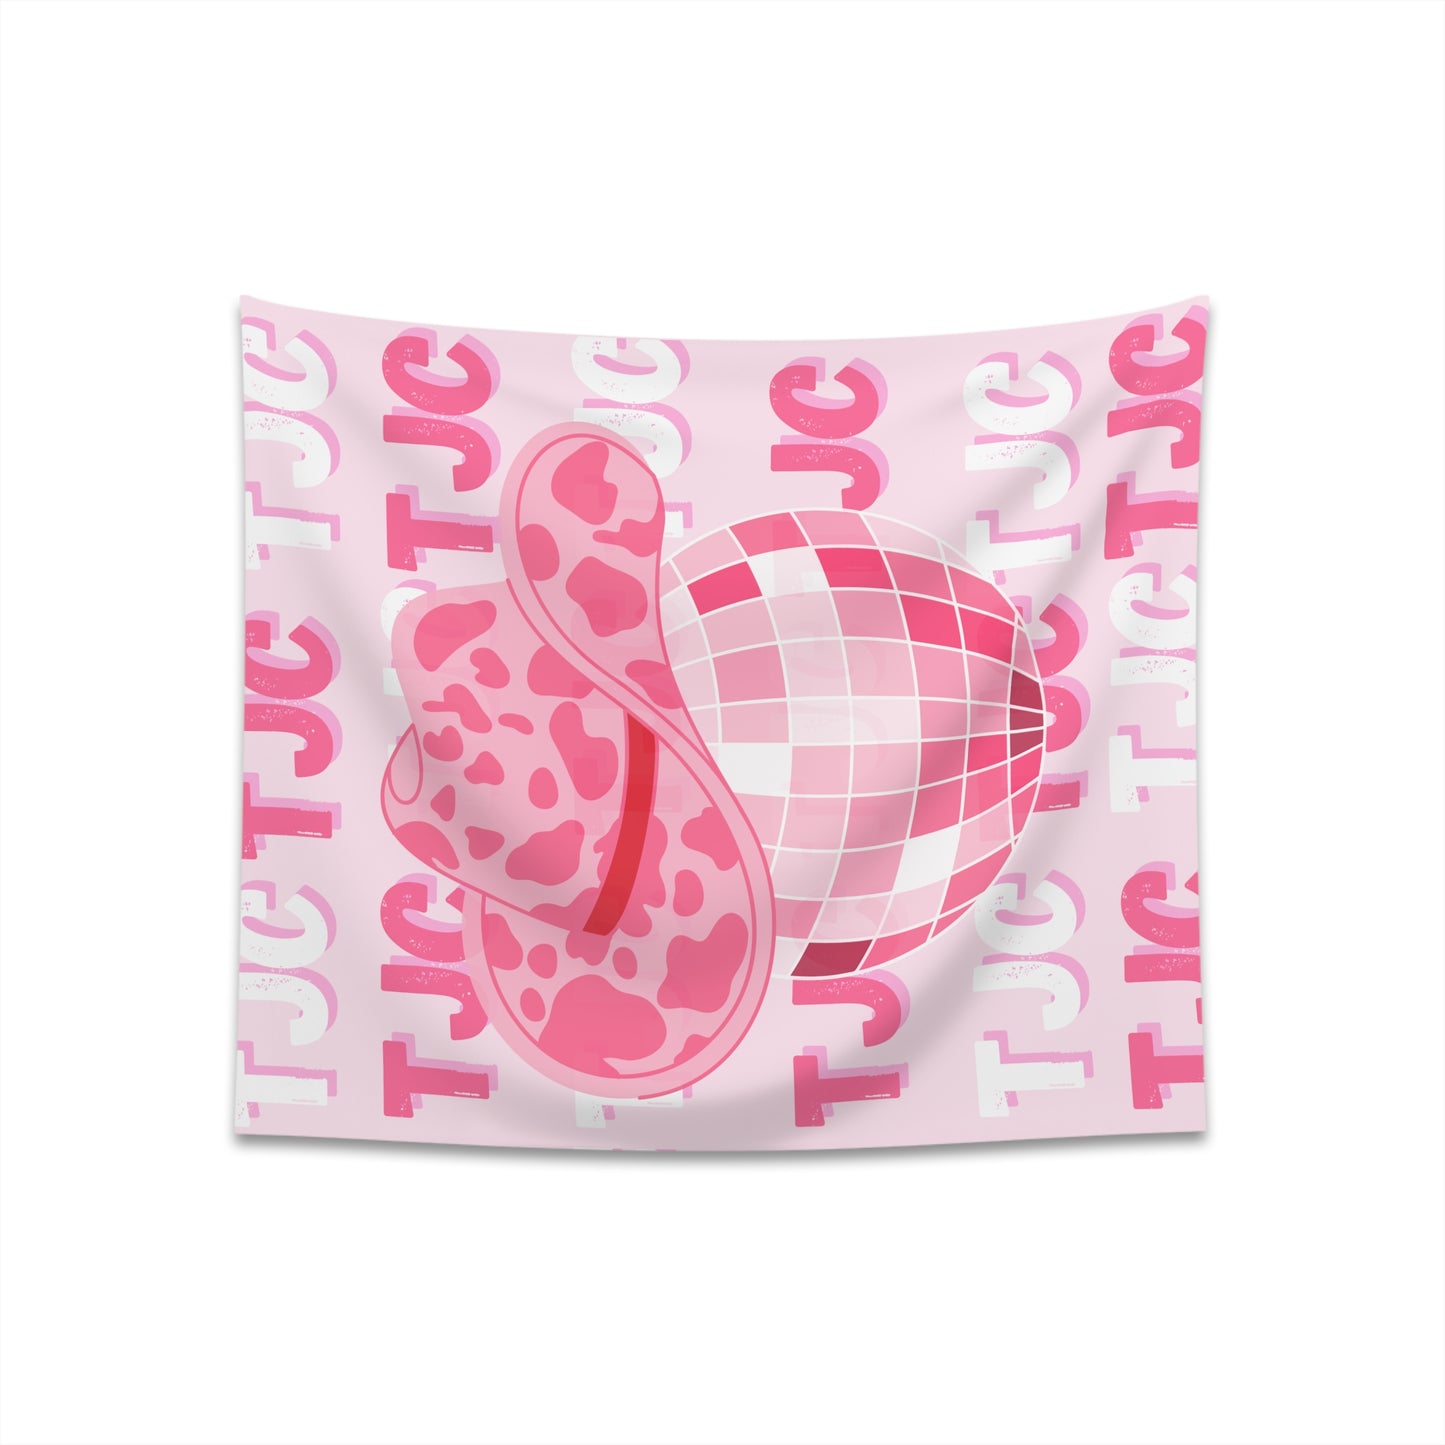 "PINK TJC" Printed Wall Tapestry